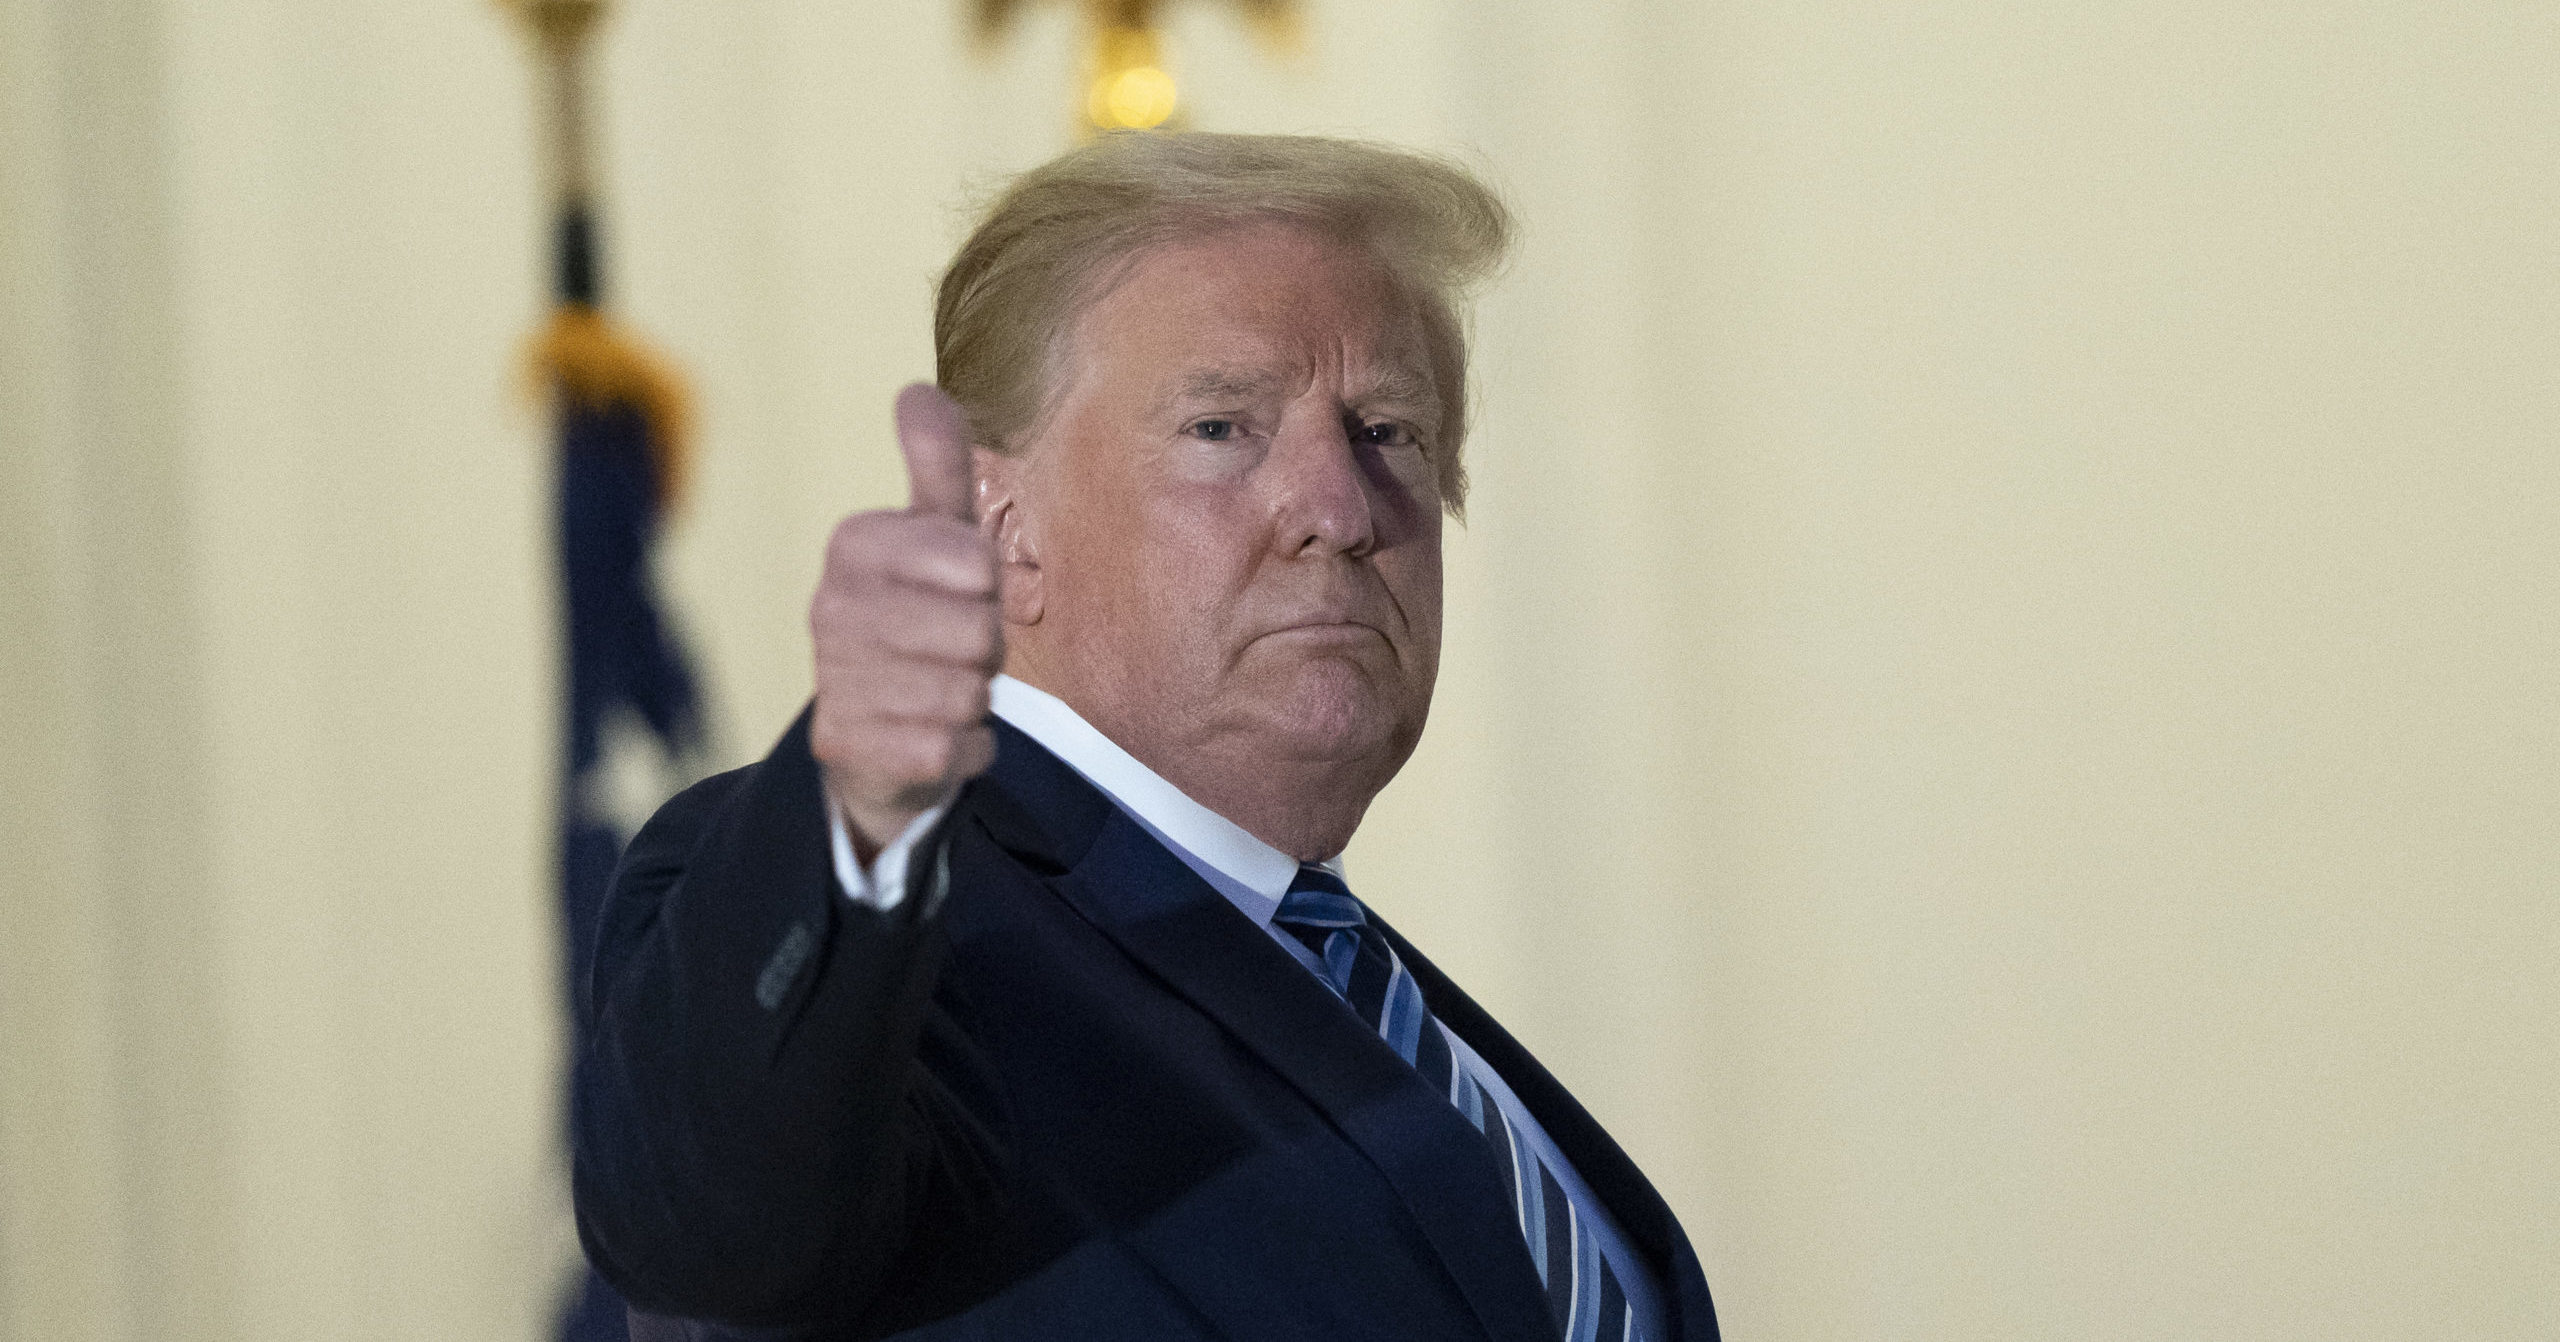 President Donald Trump gives thumbs up upon returning to the White House on Oct. 5, 2020, in Washington, D.C., after leaving Walter Reed National Military Medical Center. Trump announced he tested positive for COVID-19 on Oct. 2.